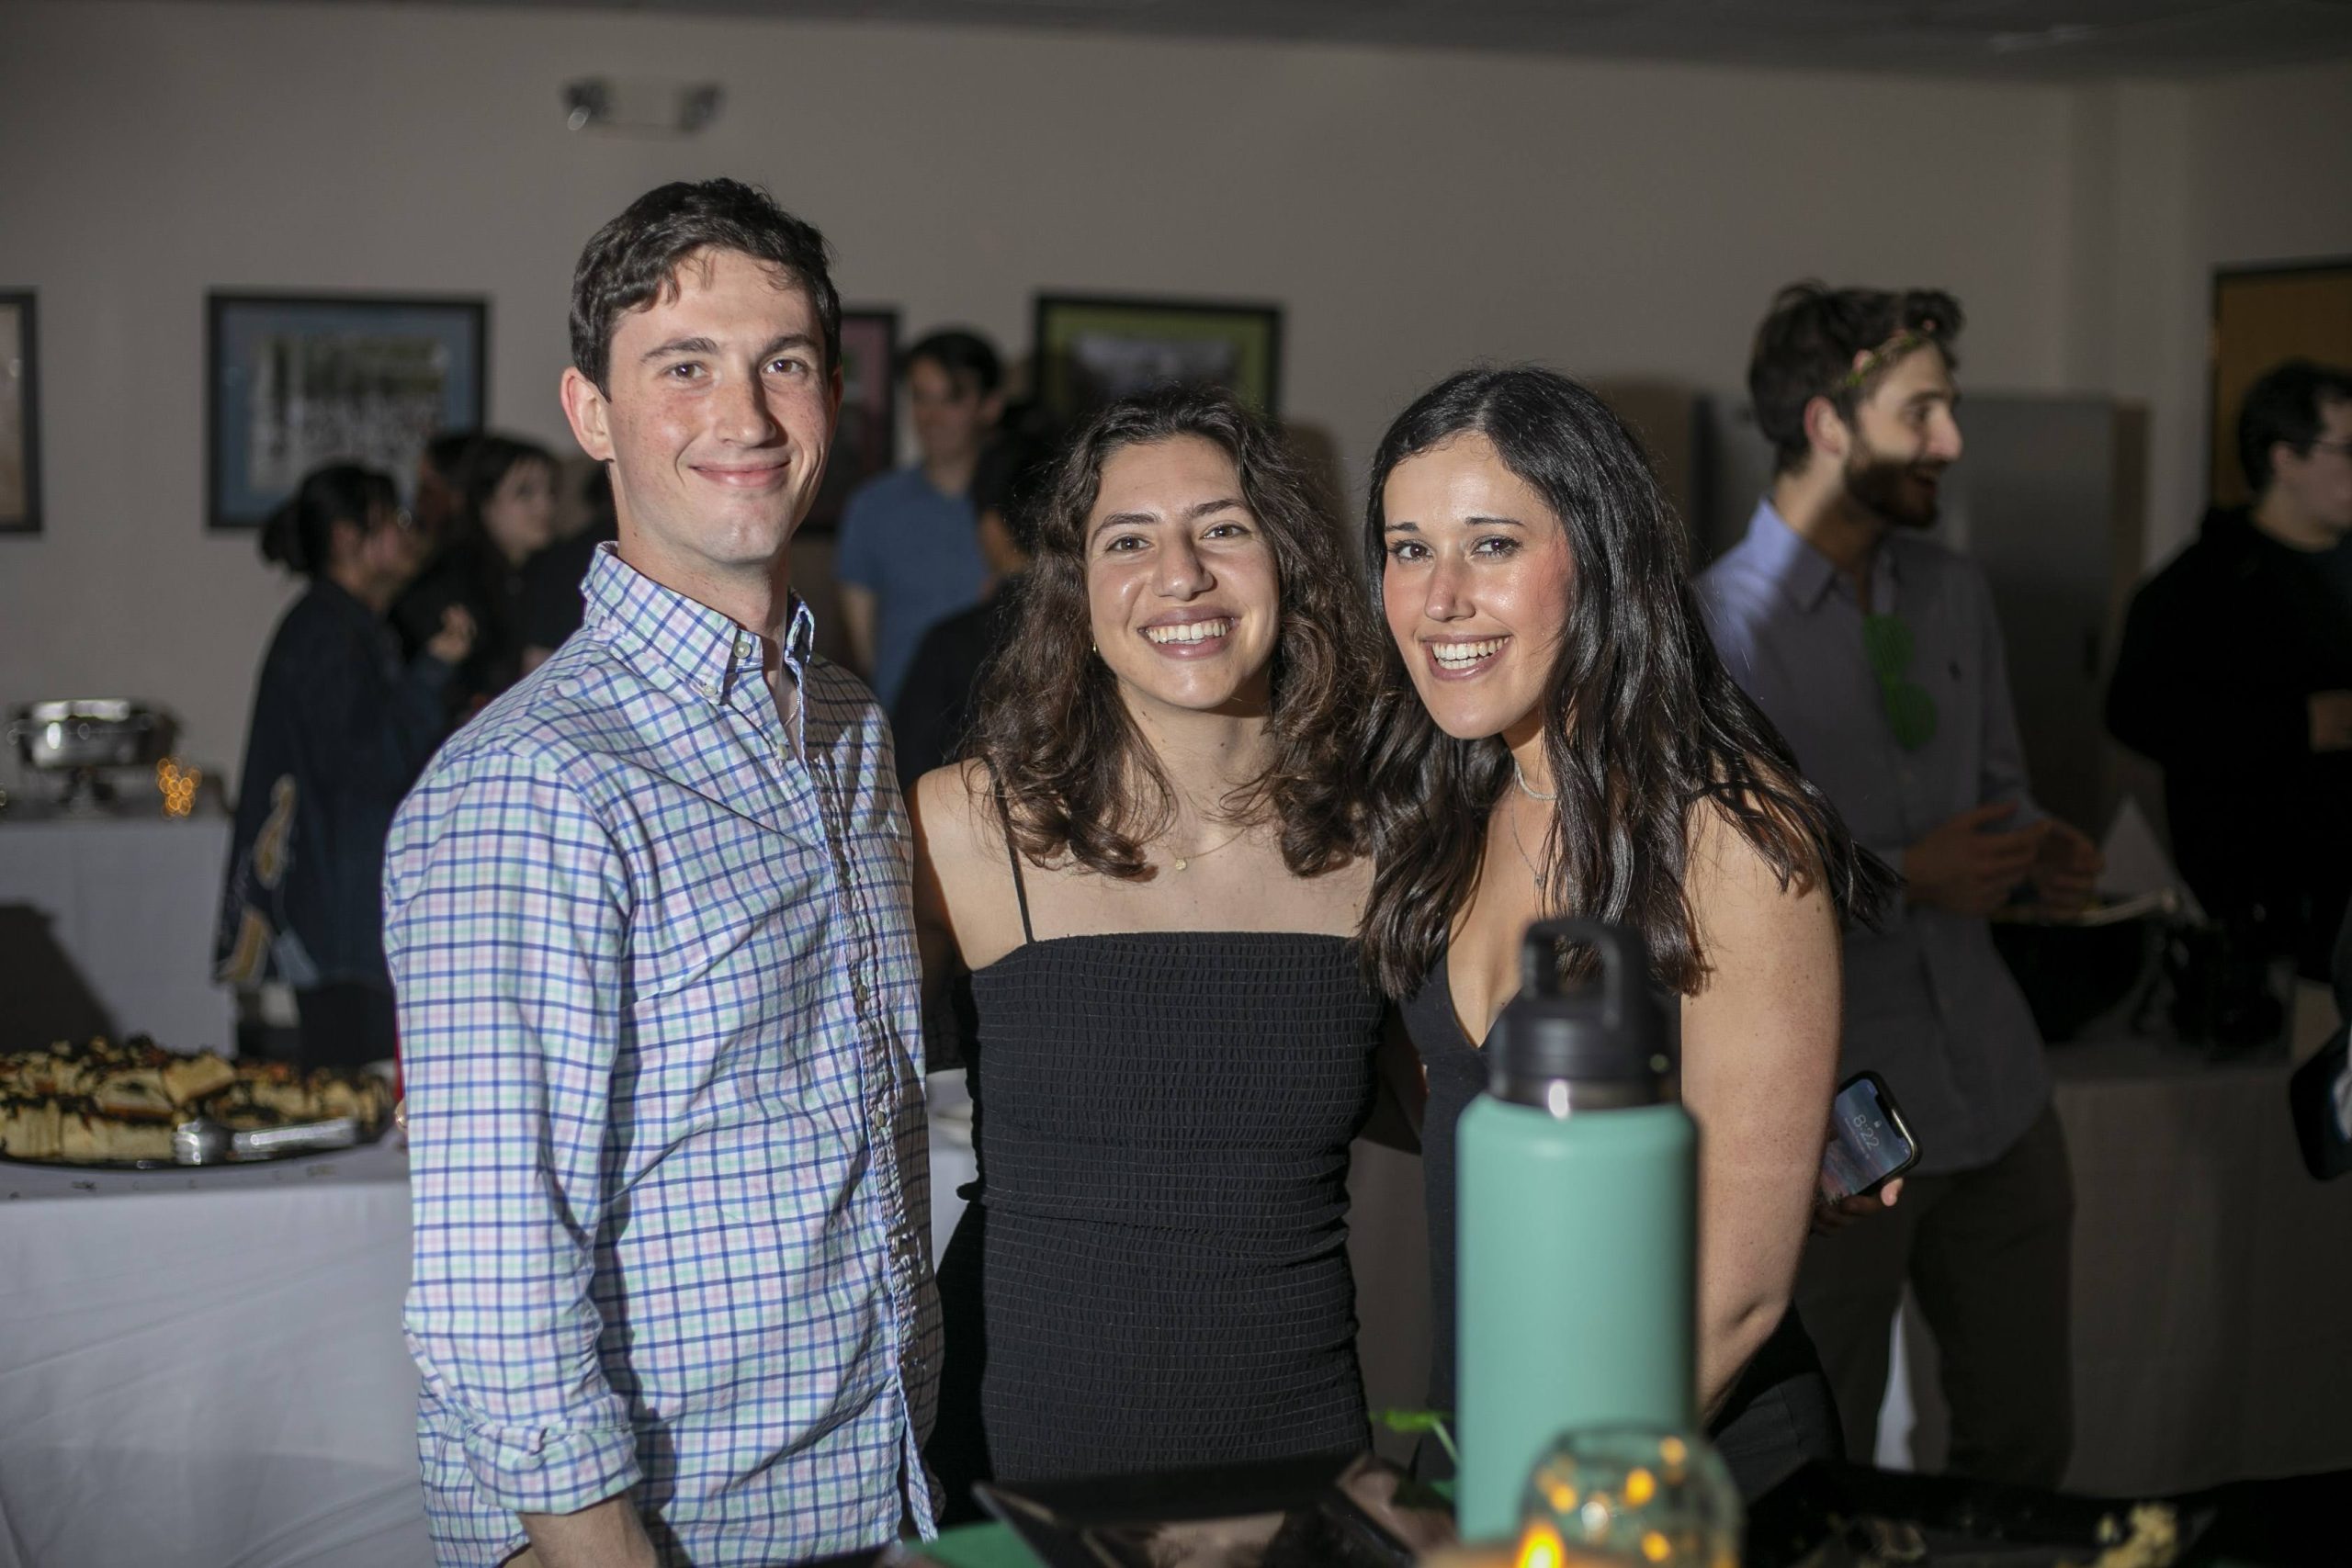 Jewish students smile at an event